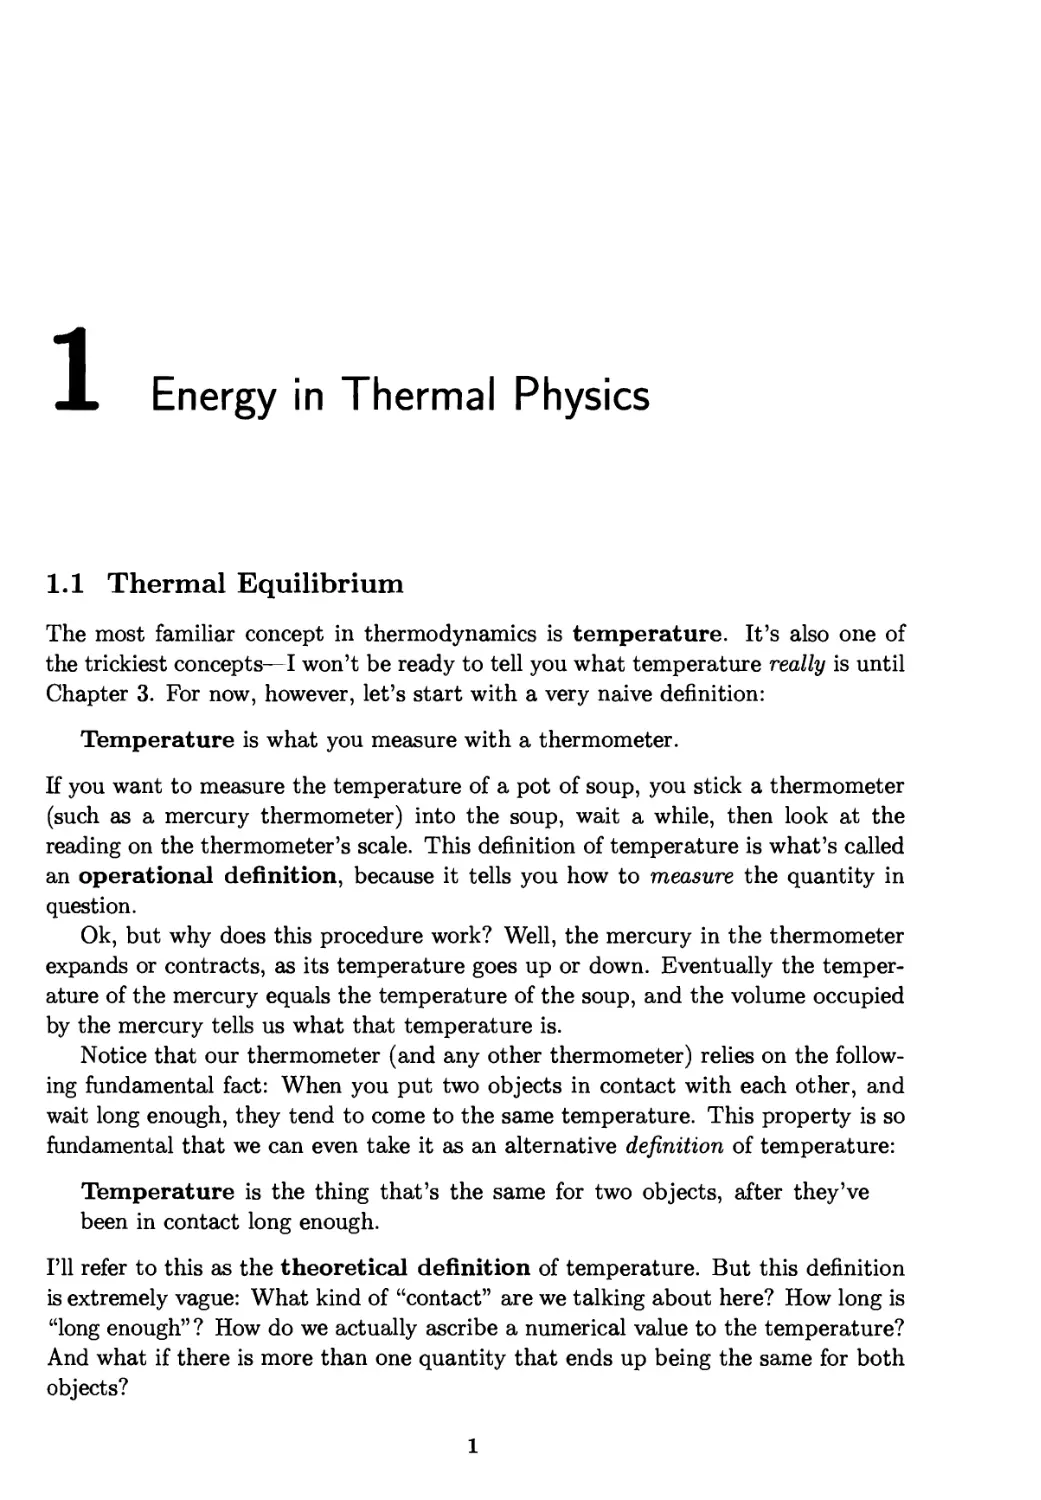 Part I: Fundamentals
Chapter 1. Energy in Thermal Physics